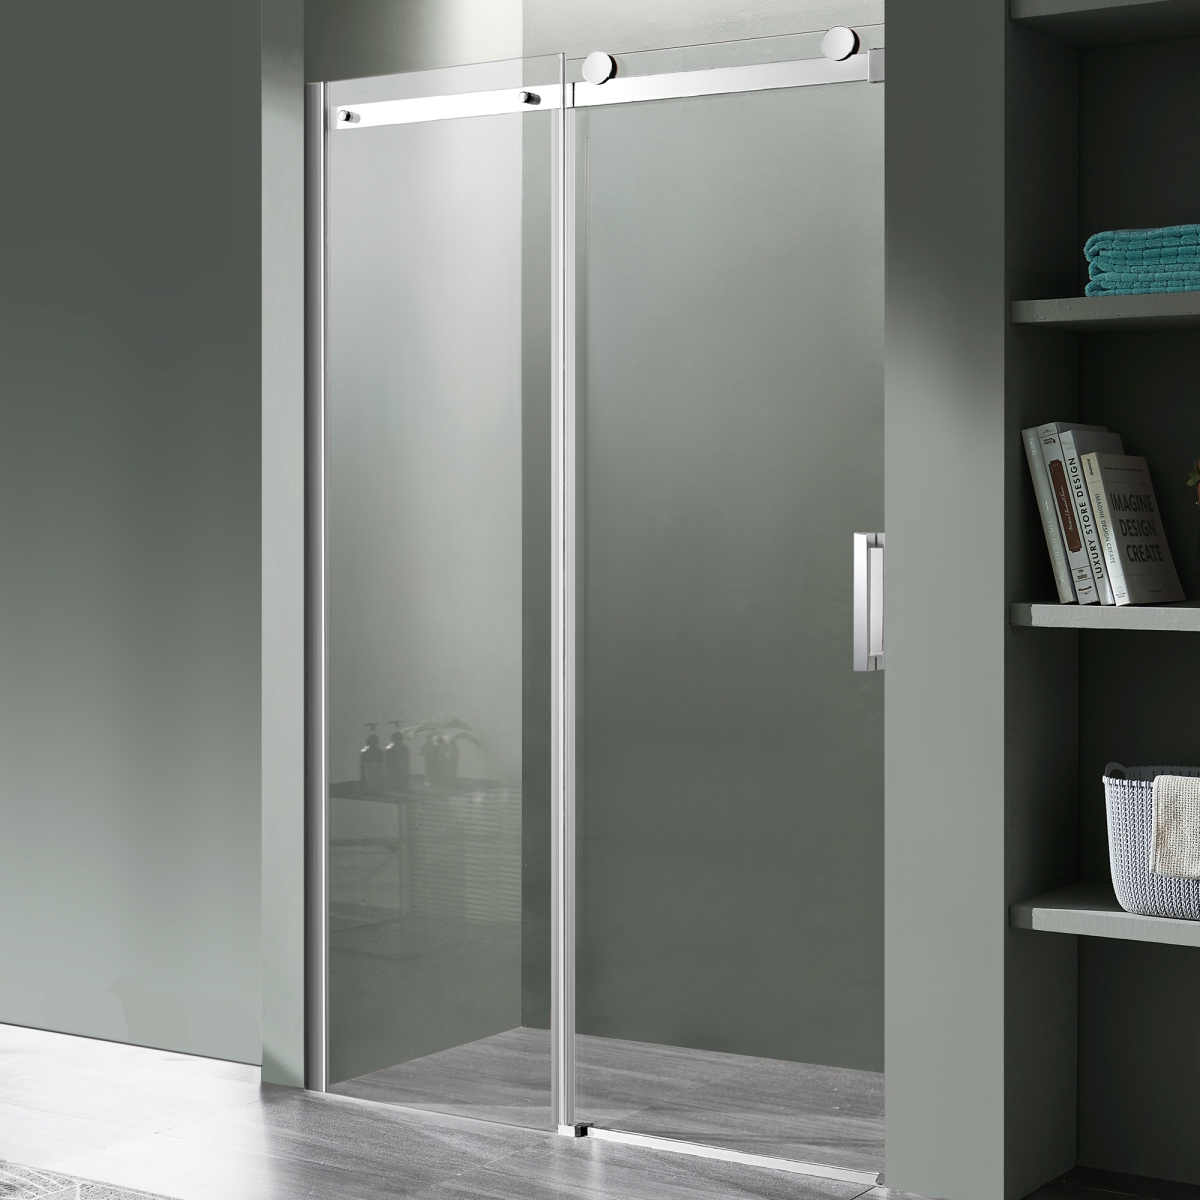 Picture of Anzzi SD-FRLS05702CH 60 x 76 in. Rhodes Series Frameless Sliding Shower Door with Handle, Chrome